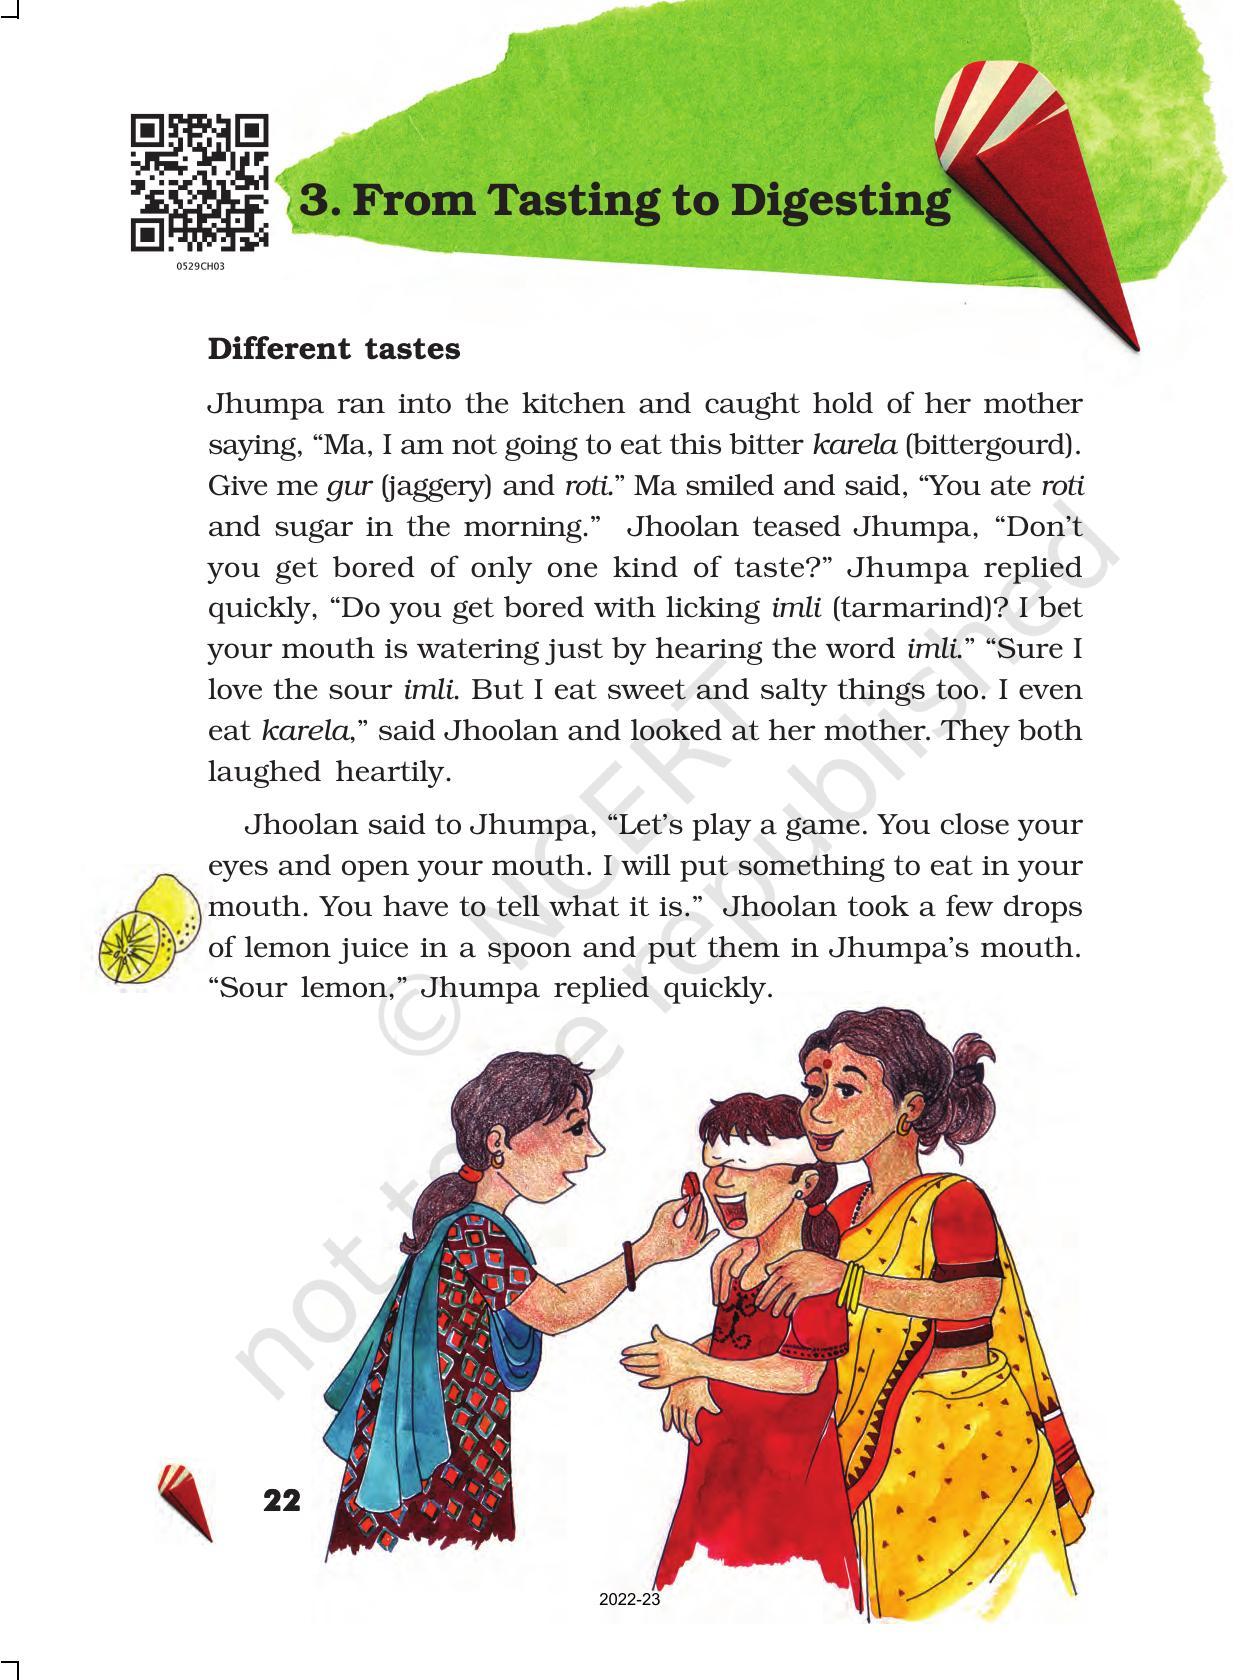 NCERT Book for Class 5 EVS Chapter 3 From Tasting to Digesting - Page 1